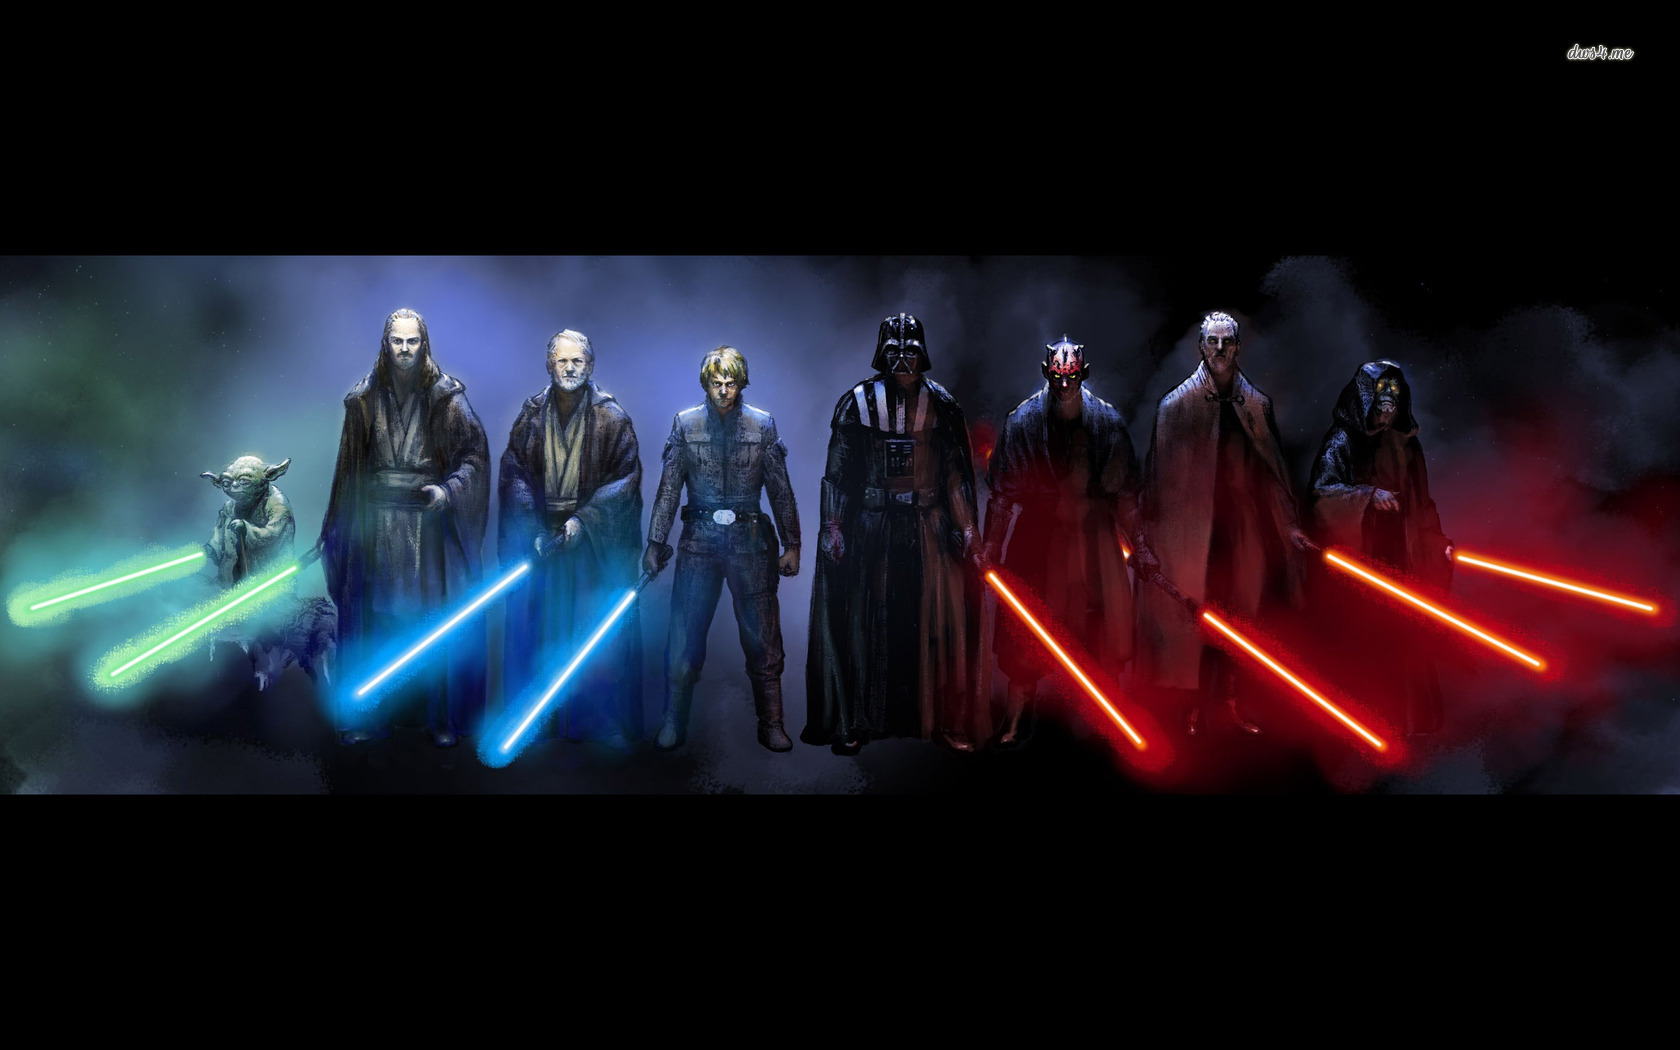  click star wars 7 hd wallpapers image and save image as click save 1680x1050